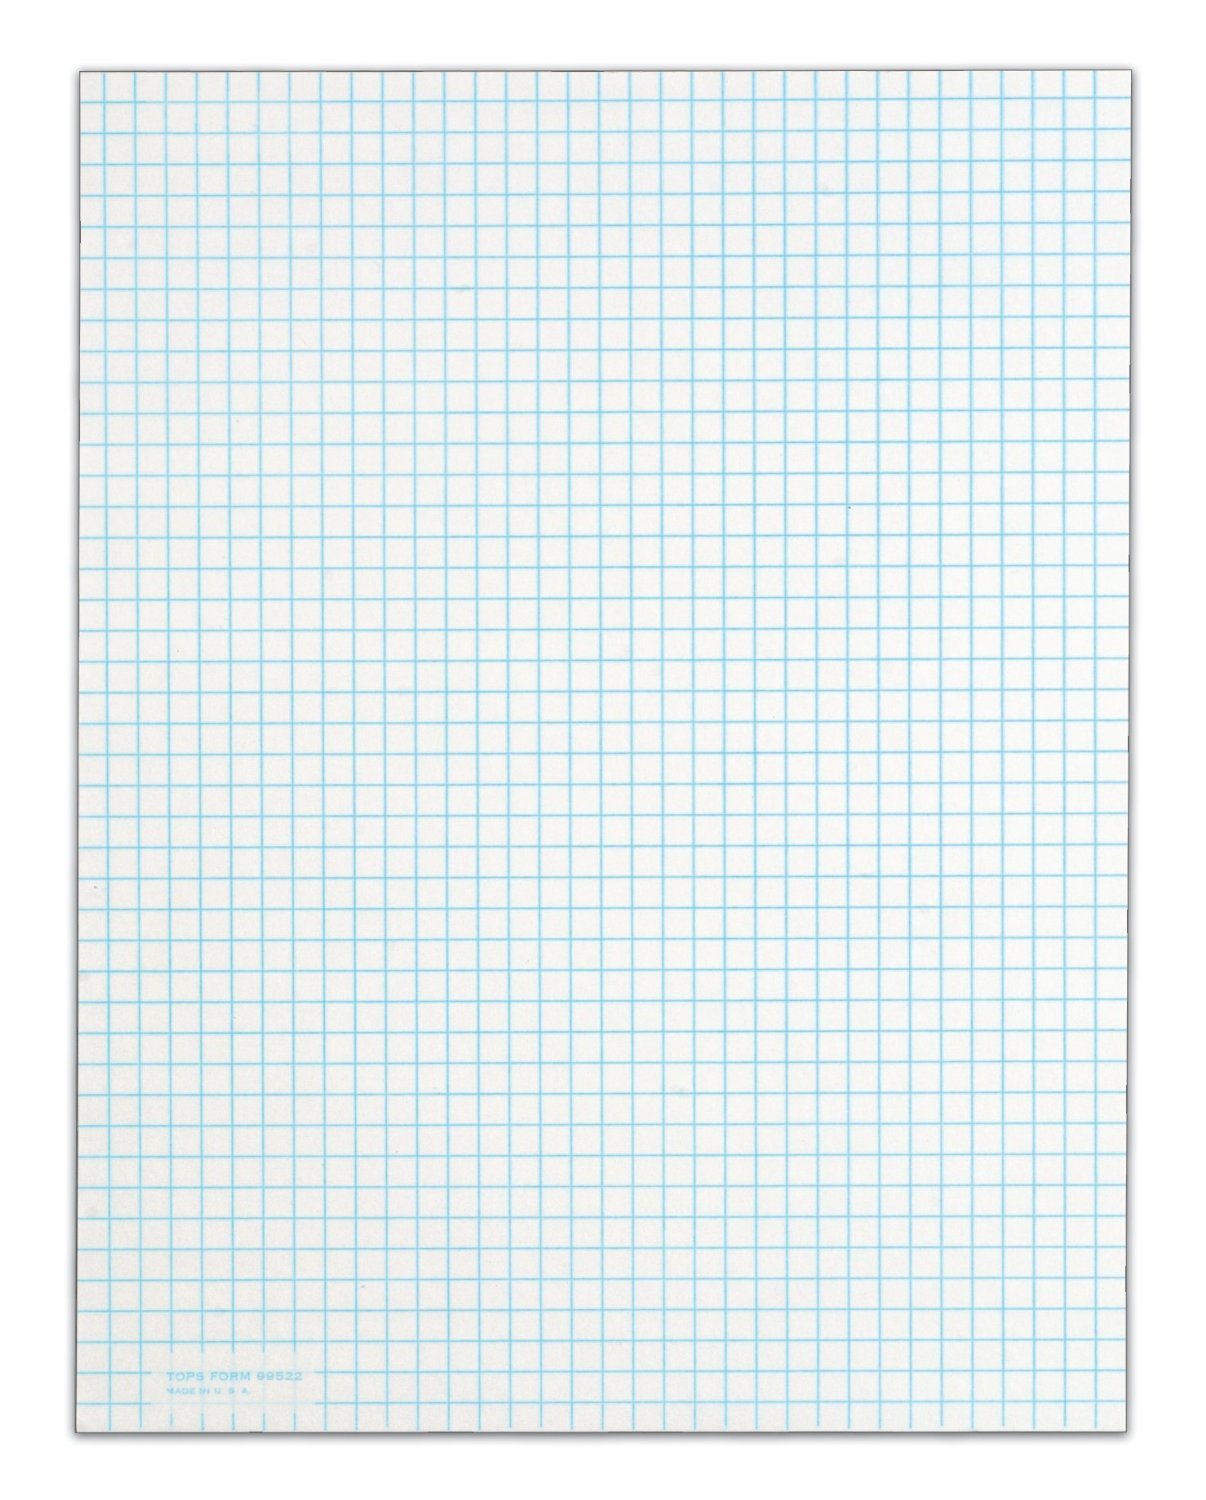 5 Best Images of Printable Grid Paper 8.5 X 11 - 1 8 Graph Paper